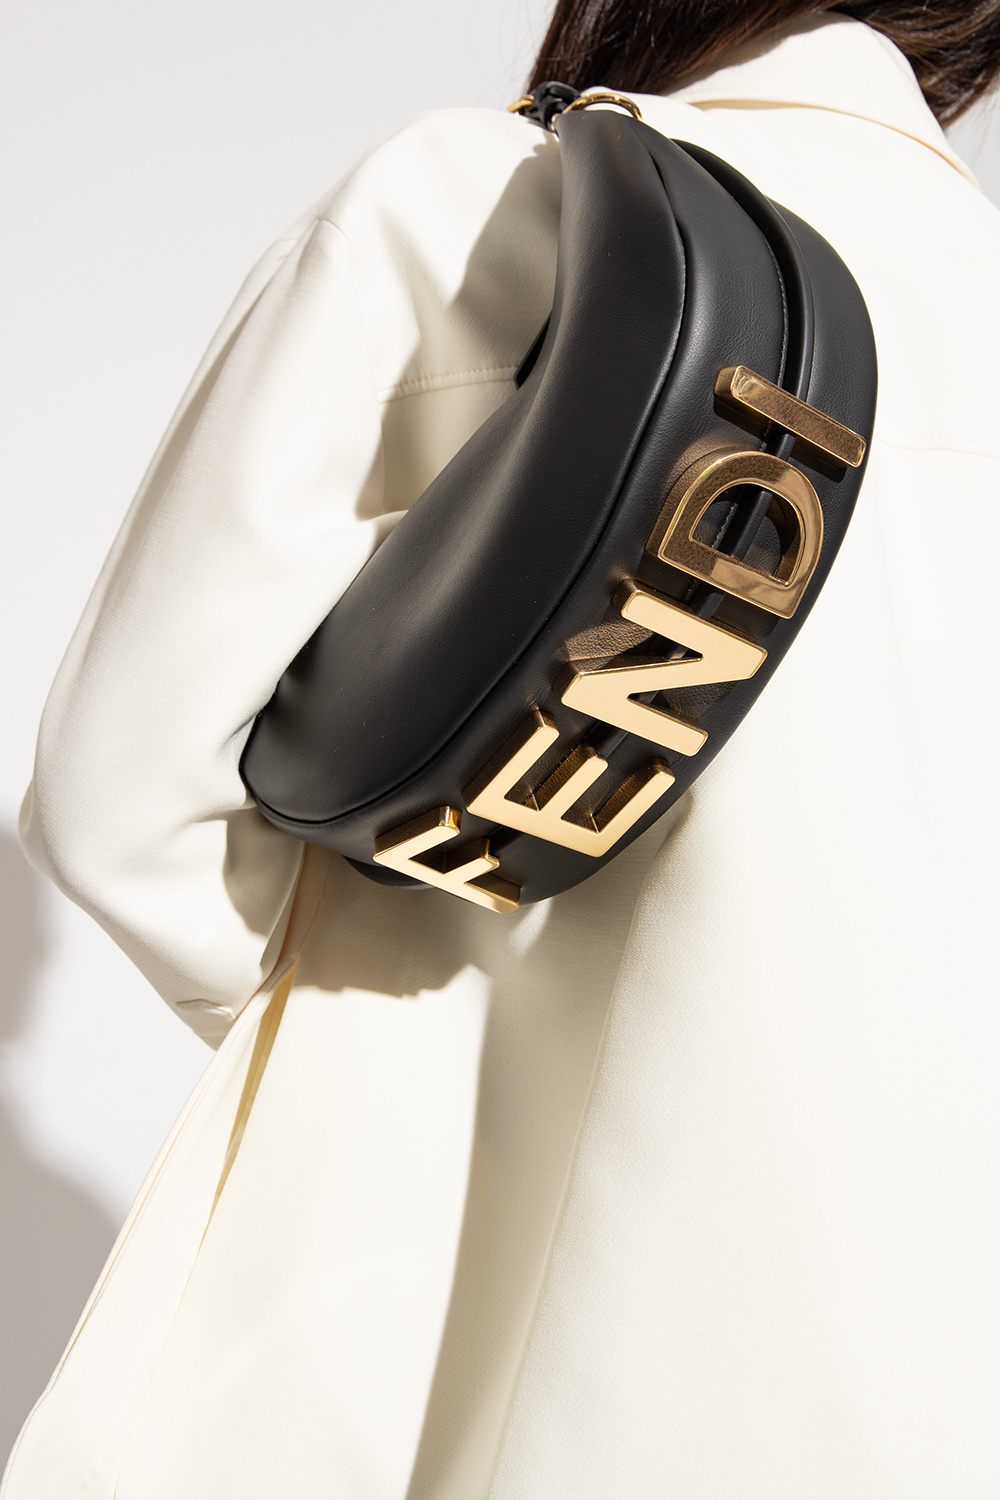 One - Fendi Pre-Owned 1990s FF-plaque leather gloves - IetpShops